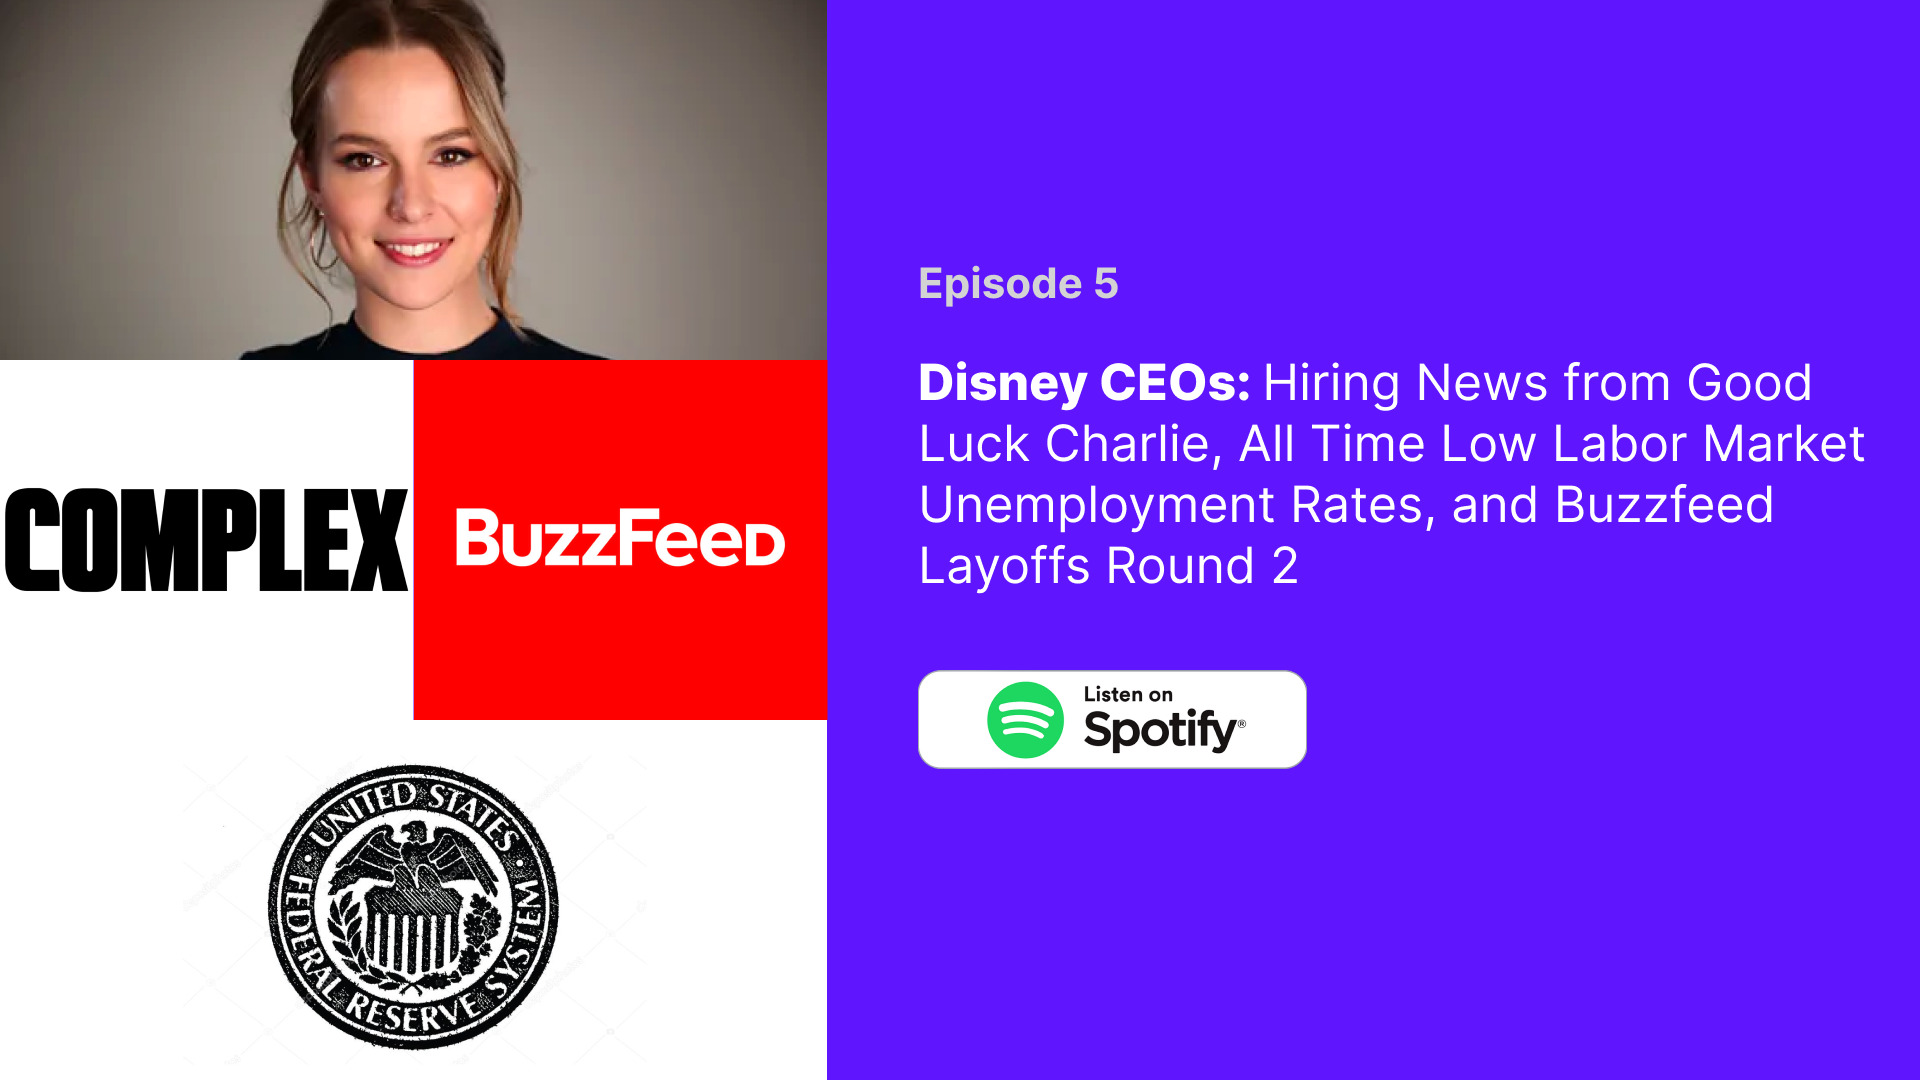 👸 Disney CEOs - Hiring News from Good Luck Charlie, All Time Low Labor Market Unemployment Rates, and Buzzfeed Layoffs Round 2